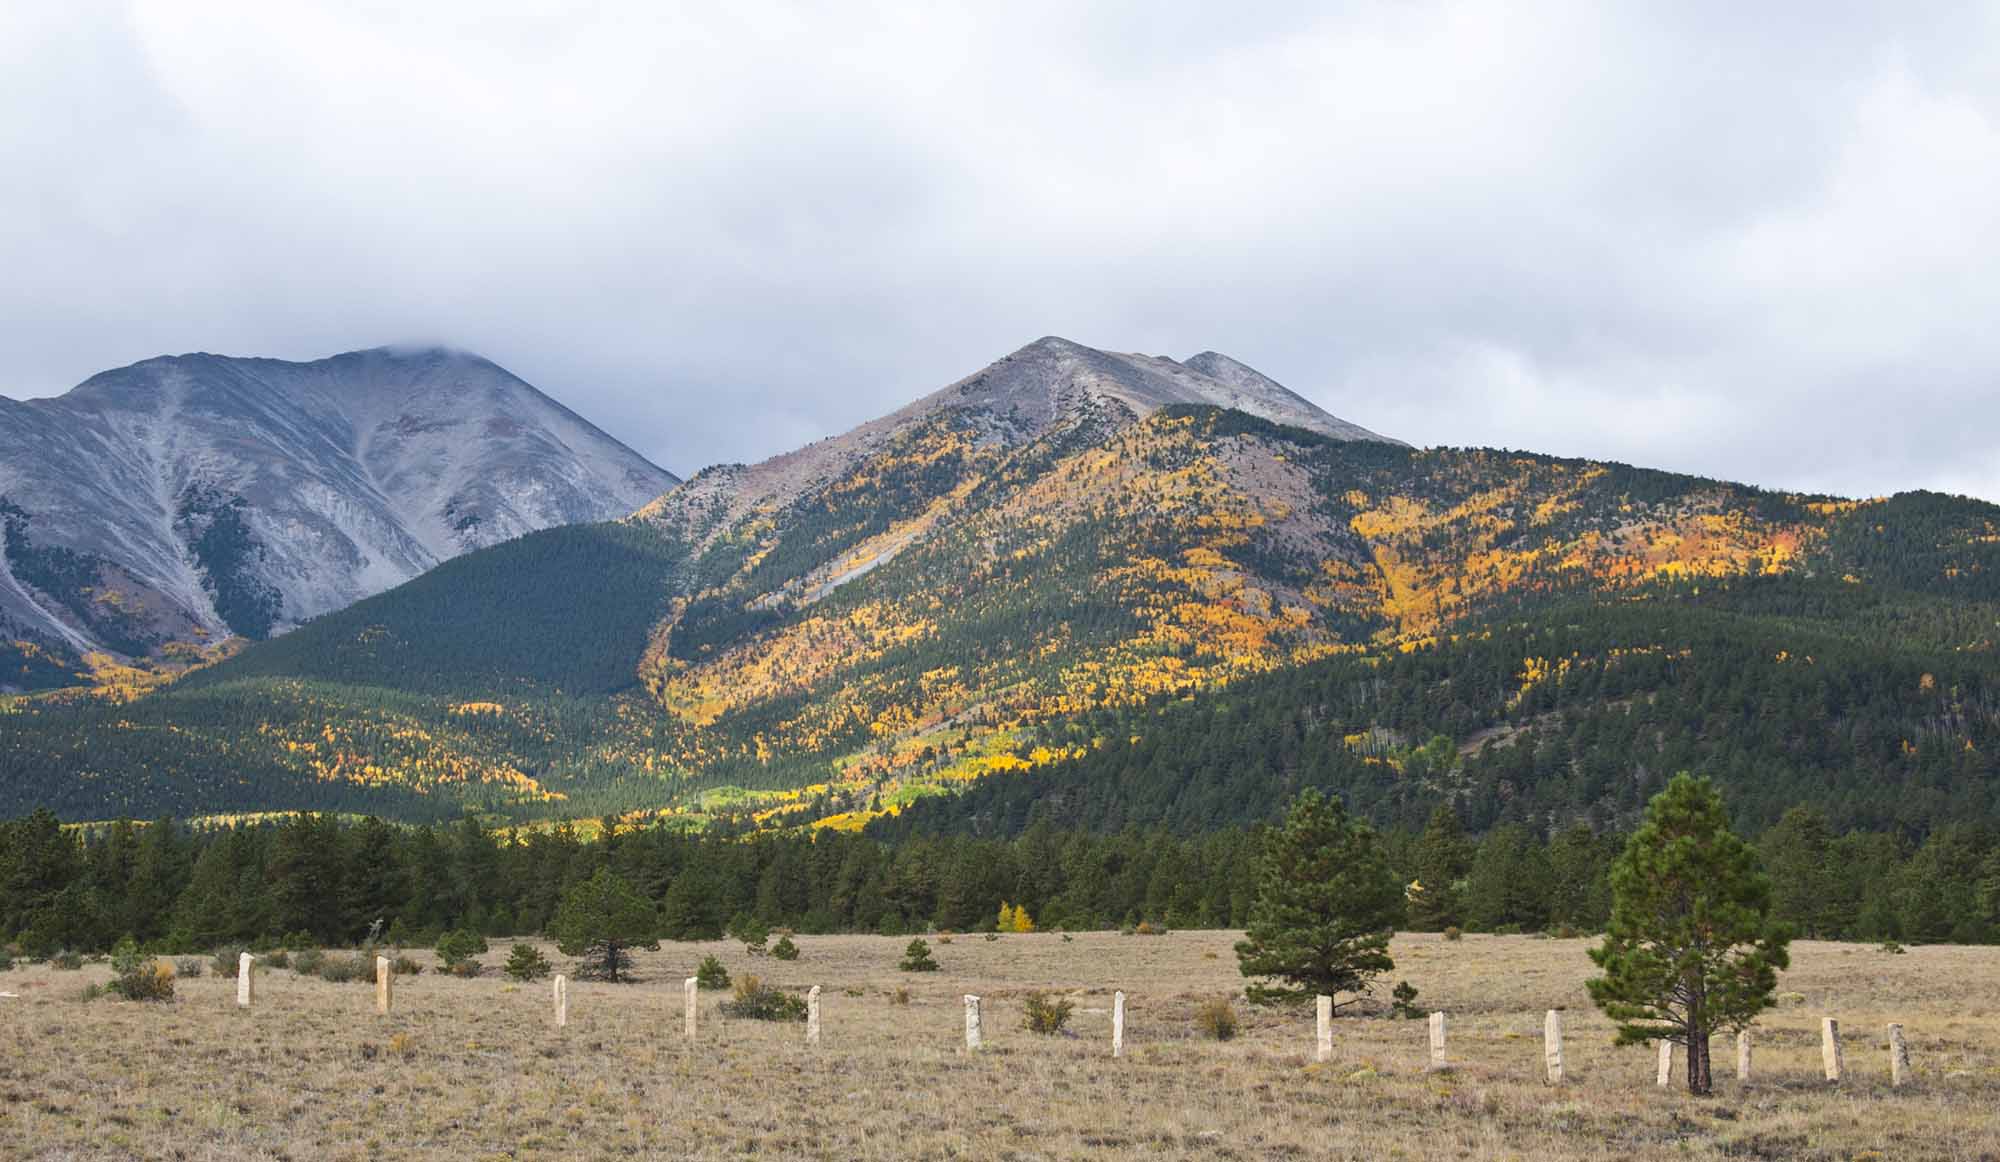 A mountain speckled with fall colors.